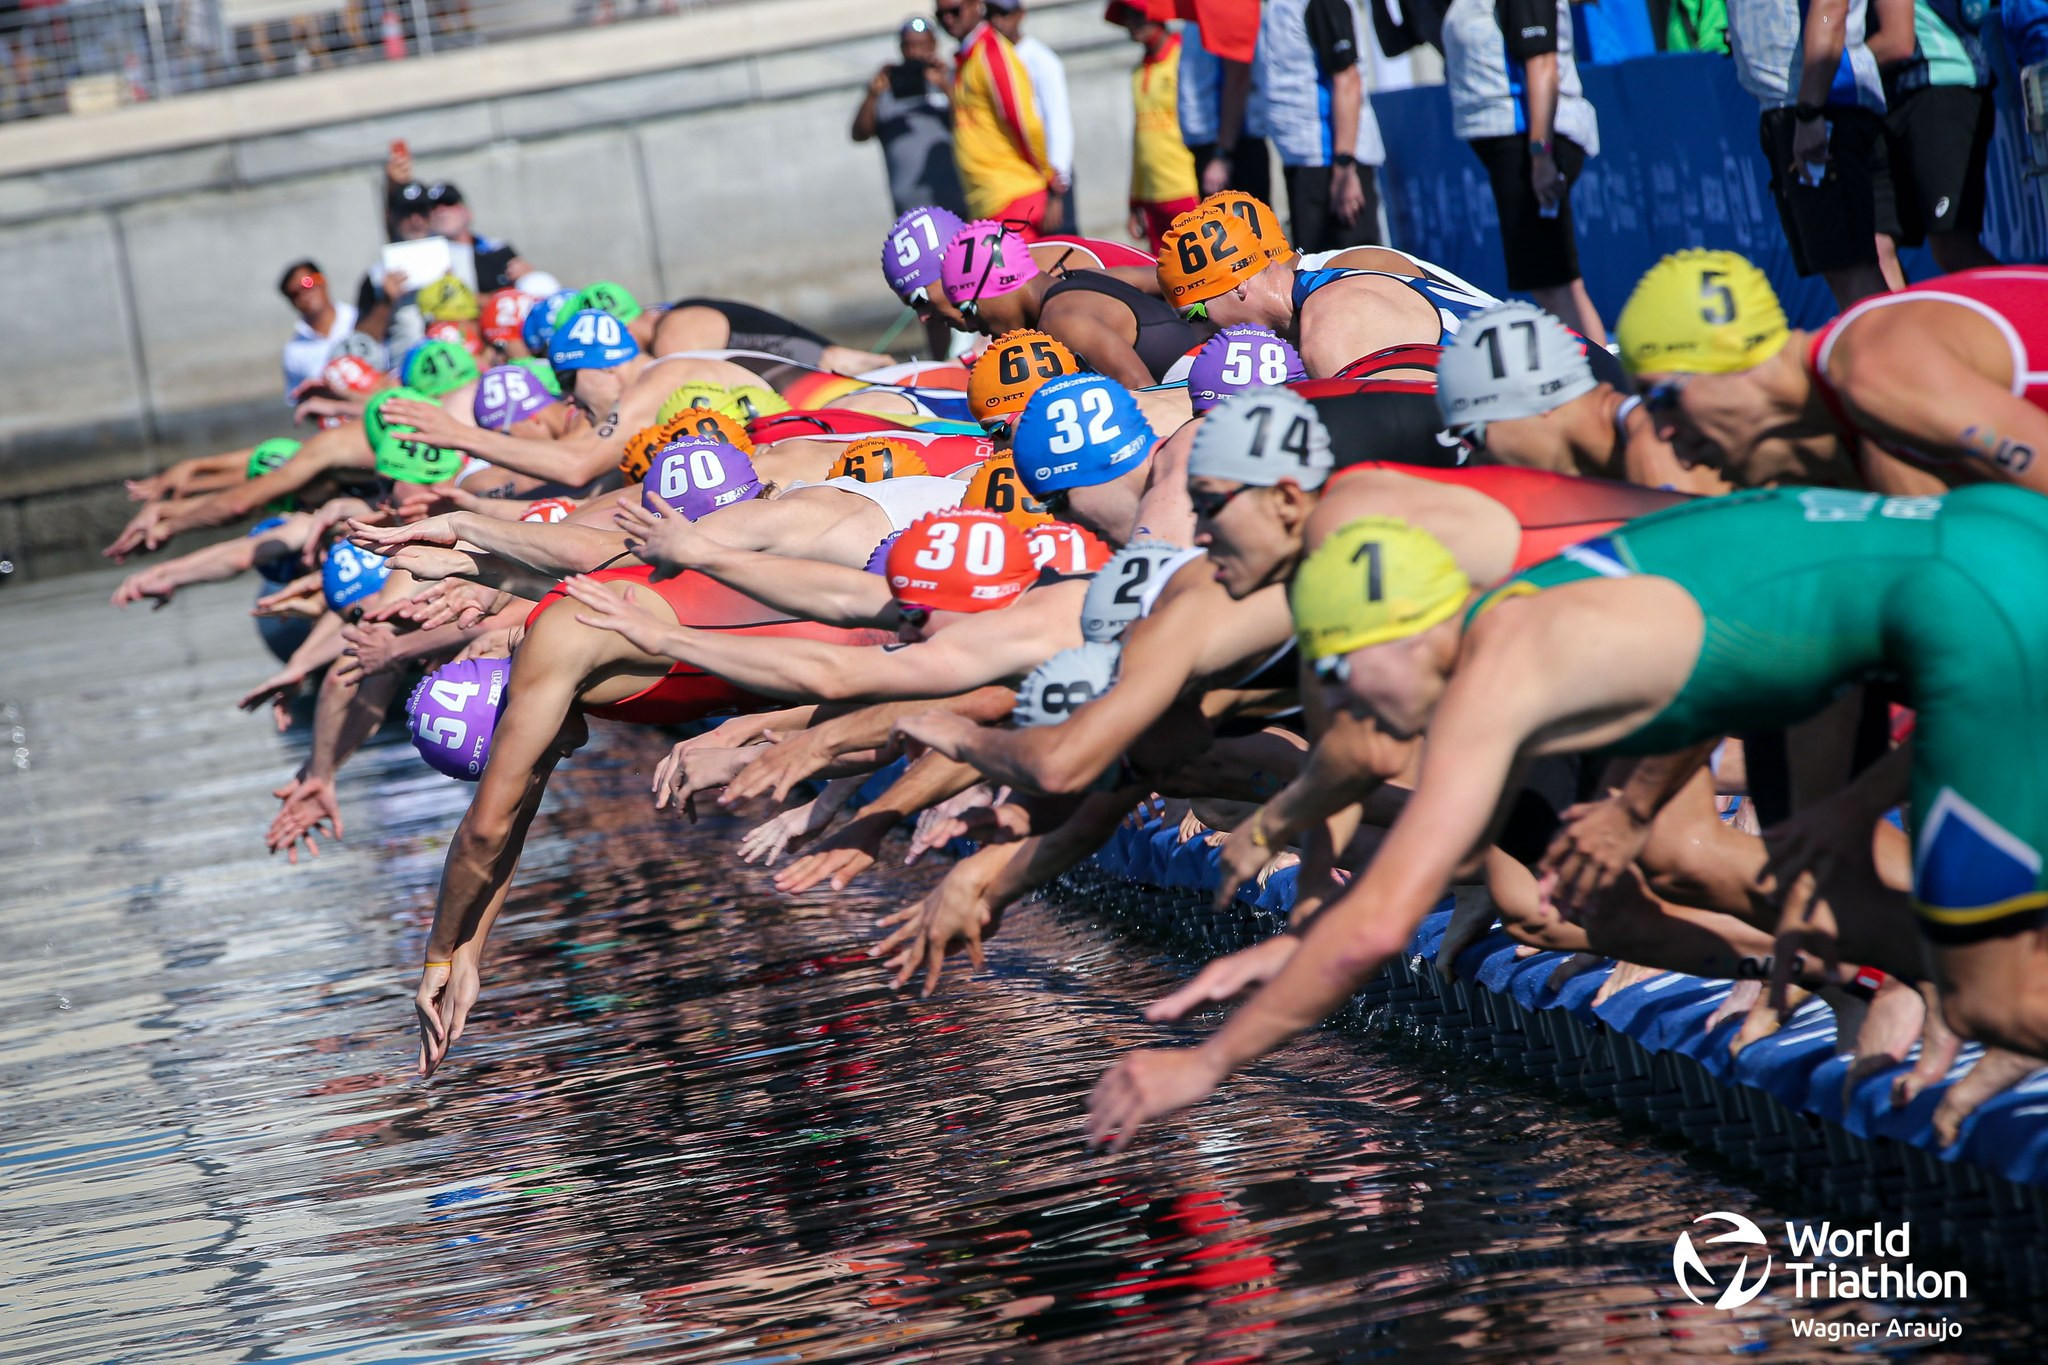 World Triathlon Championship Finals: Day two of competition